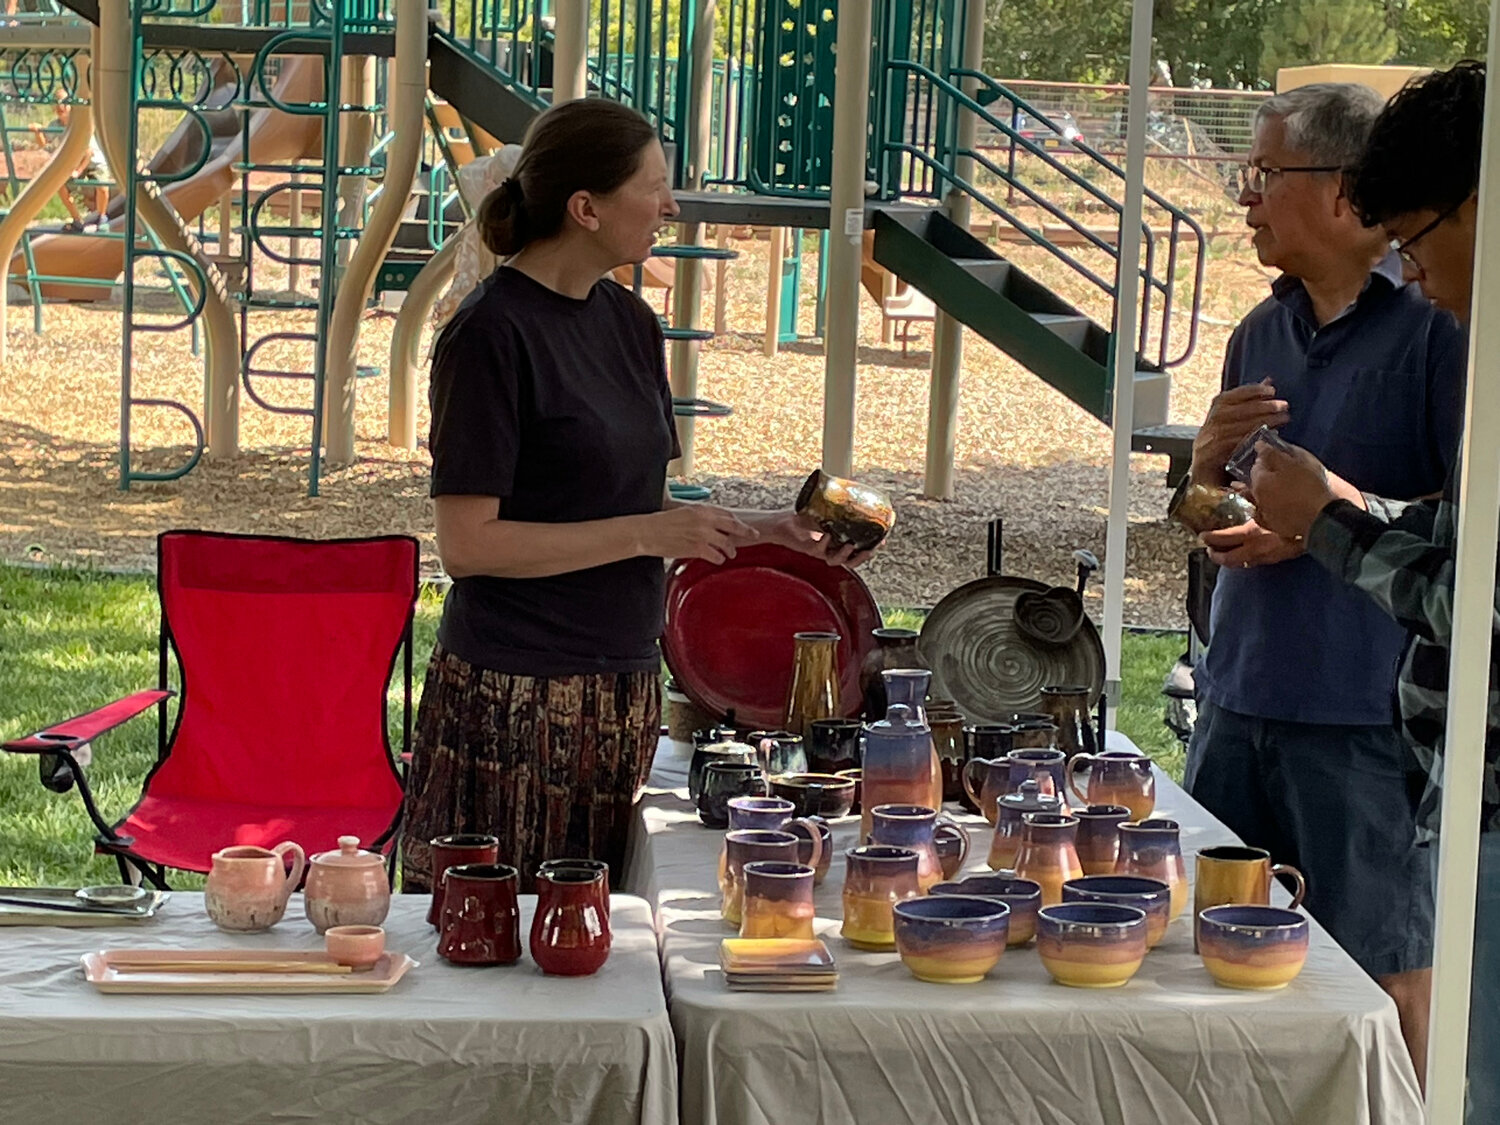 Jen Noel, president of the Corrales Society of Artists, speaks to customers during Arts in the Park on July 8. The popular event returned to La Entrada Park after a three-year absence. (T.S. Last/Corrales Comment)